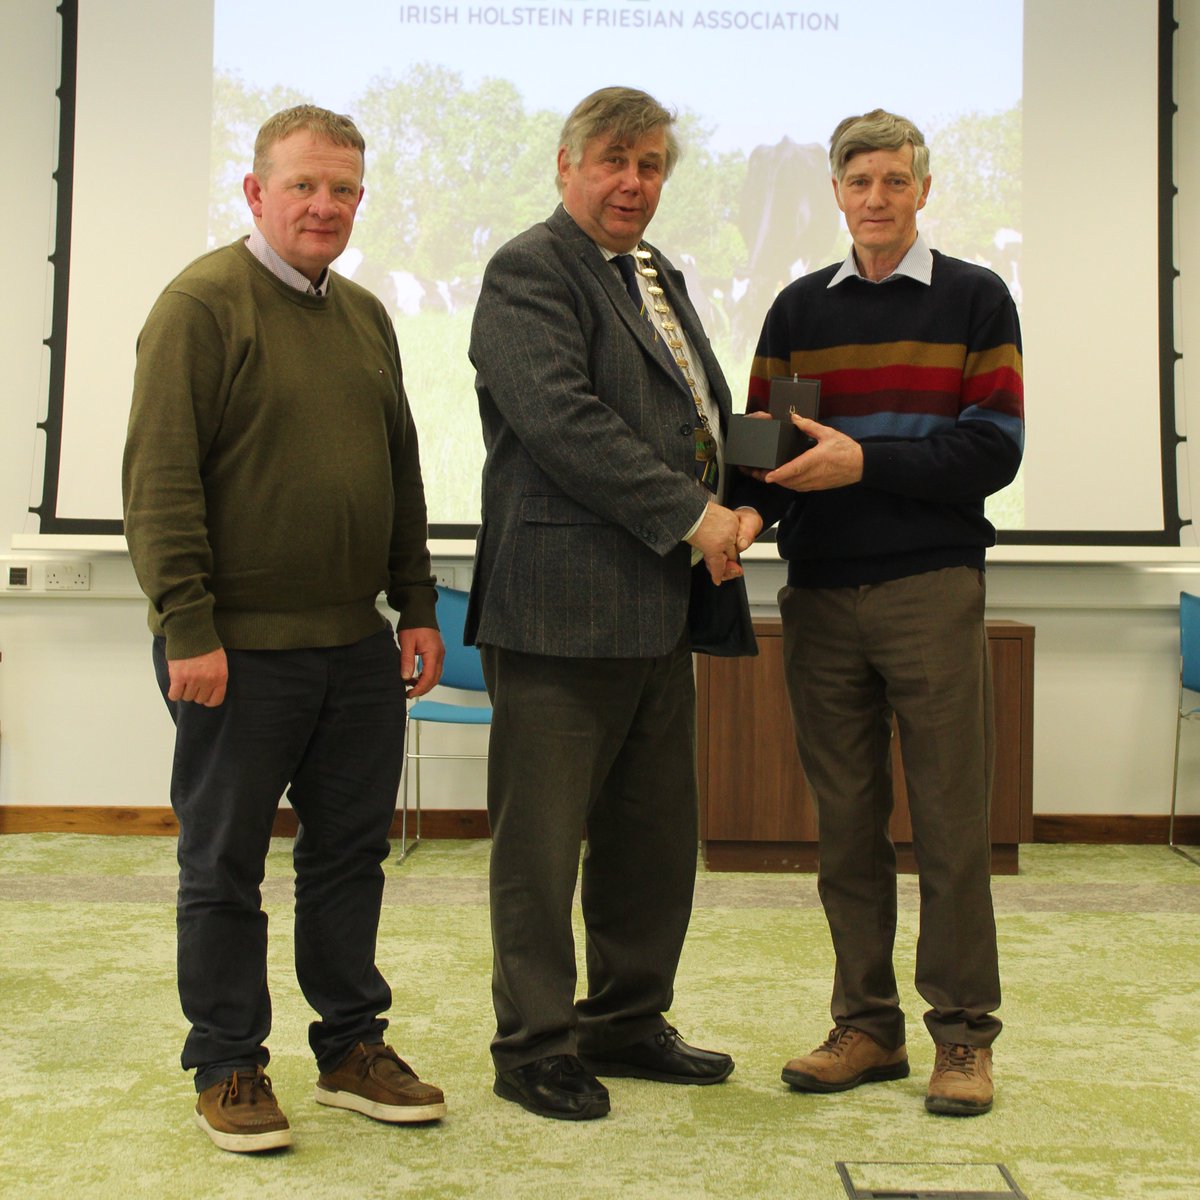 After many years on the IHFA Board we say fair well and thank you to Peter Ging (Ballyclider Herd) Laois Offaly Club - Host of IHFA National Open Day 2023. Peter has been a great asset to Board of the Association.